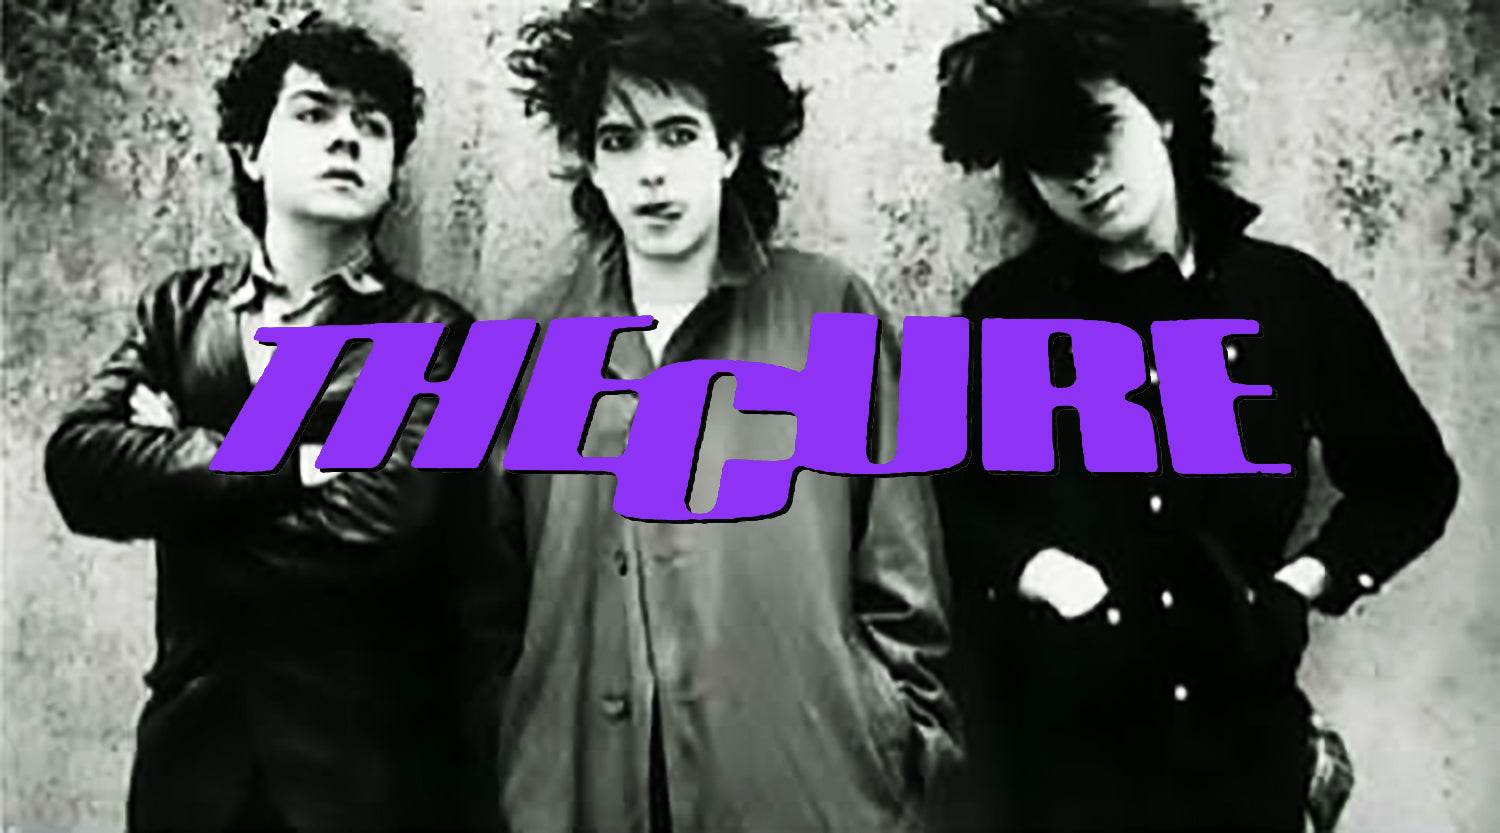 The Cure and The Cure Discography